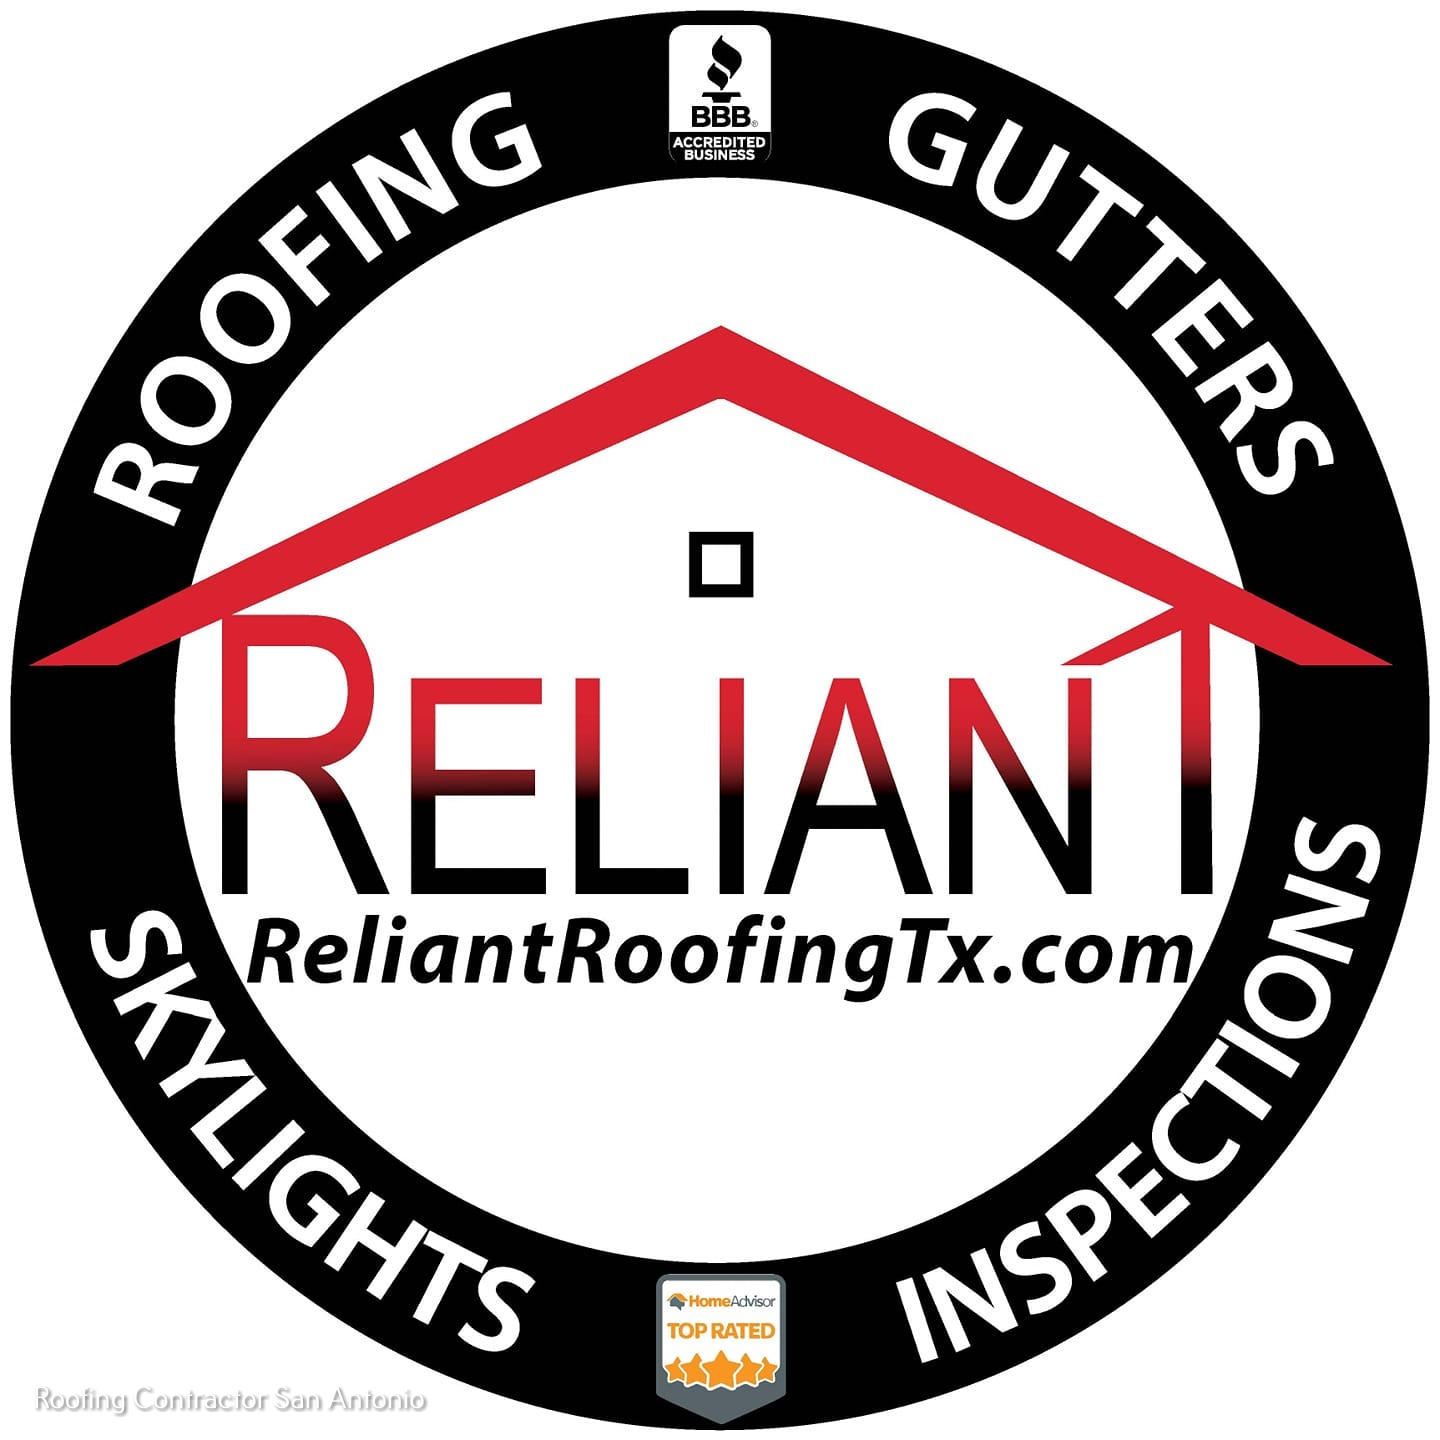 Reliant Roofing Elaborates on the Benefits of Timely Roofing Services